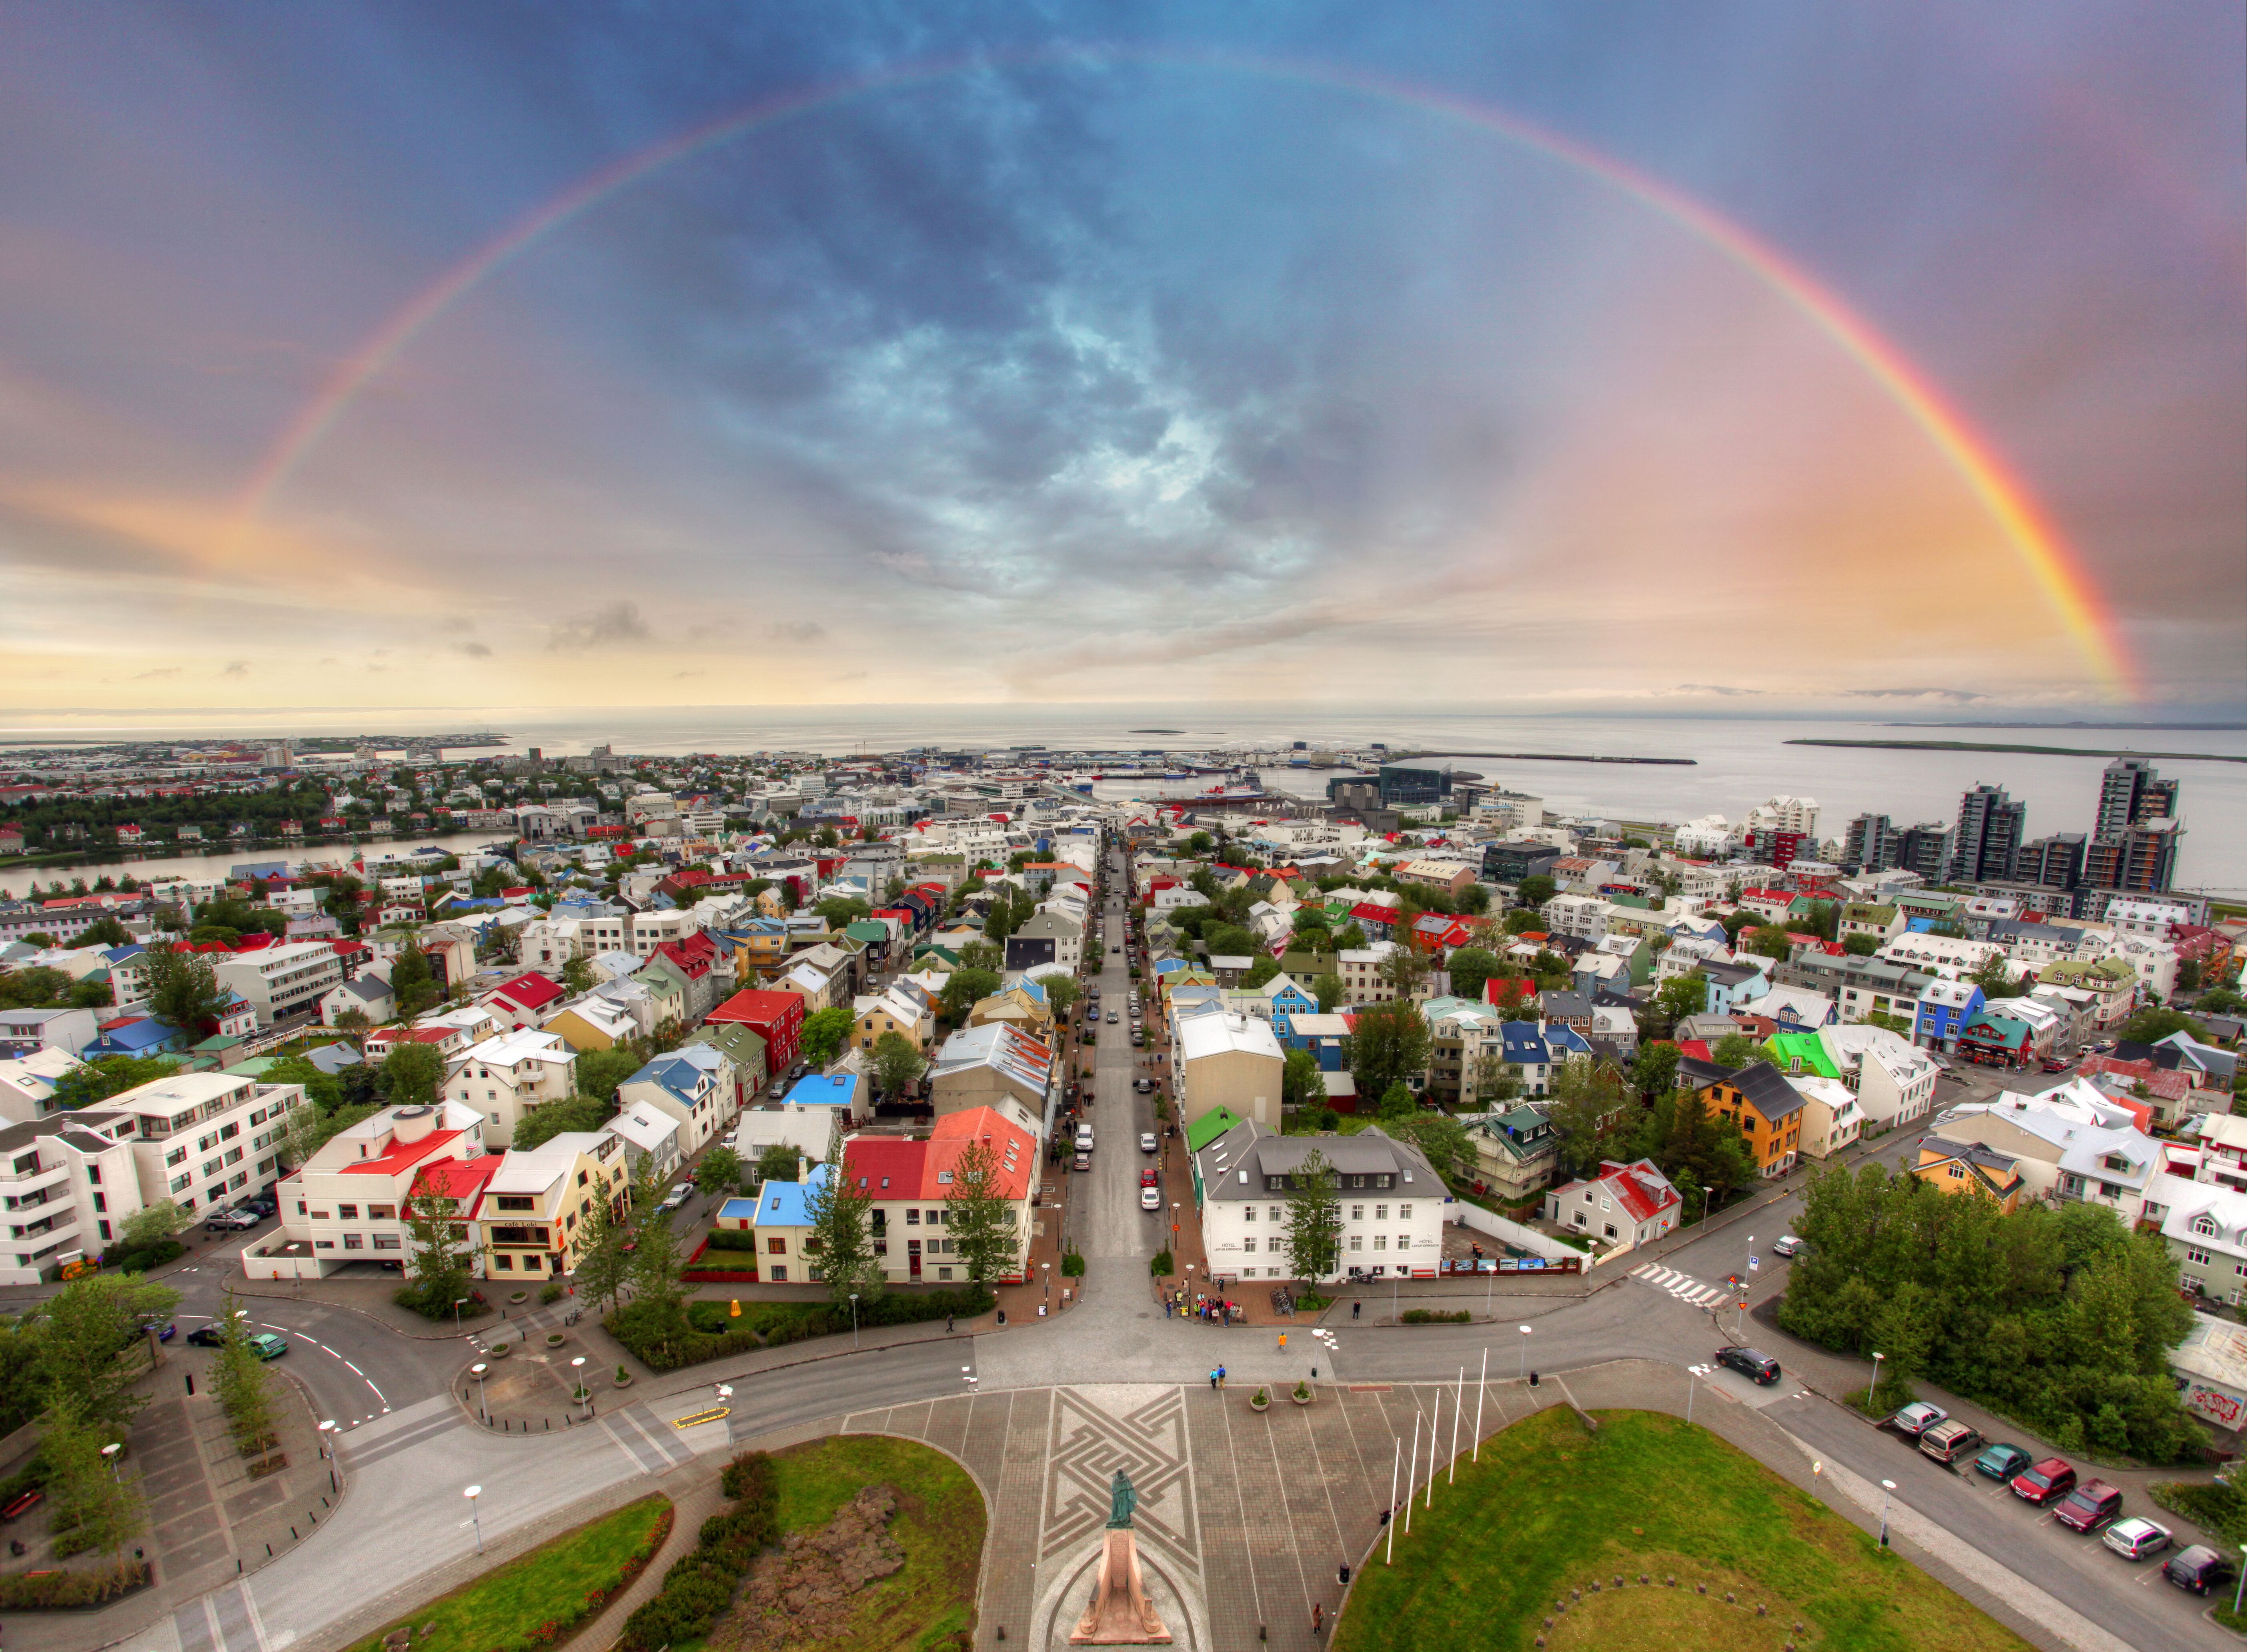 A spectacular rainbow arches across the skies above the colourful rooftops of the city of Reykjavík, as seen from the church of Hallgrímskirkja.